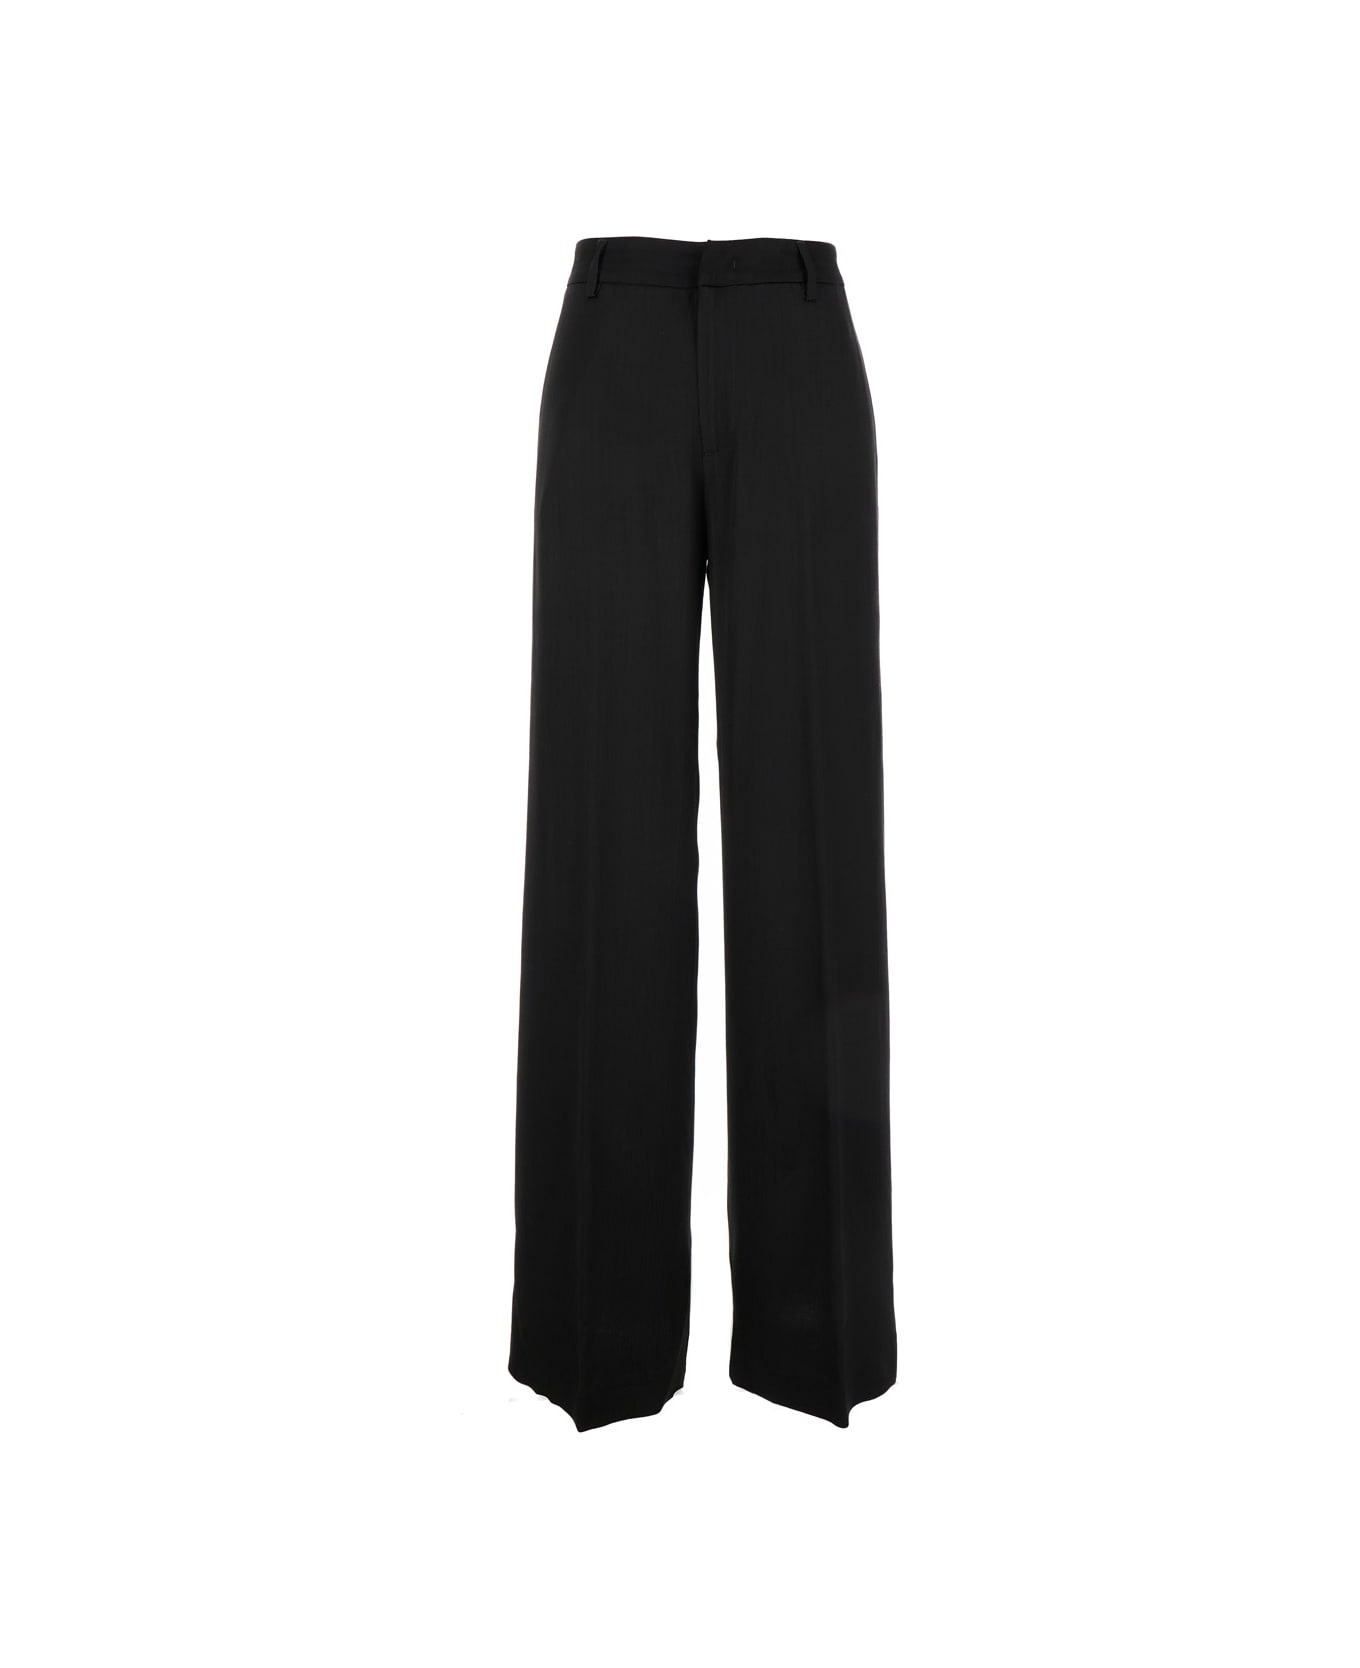 PT Torino 'lorenza' Black Relaxed Pants With Welt Pockets In Viscose Woman - Black ボトムス